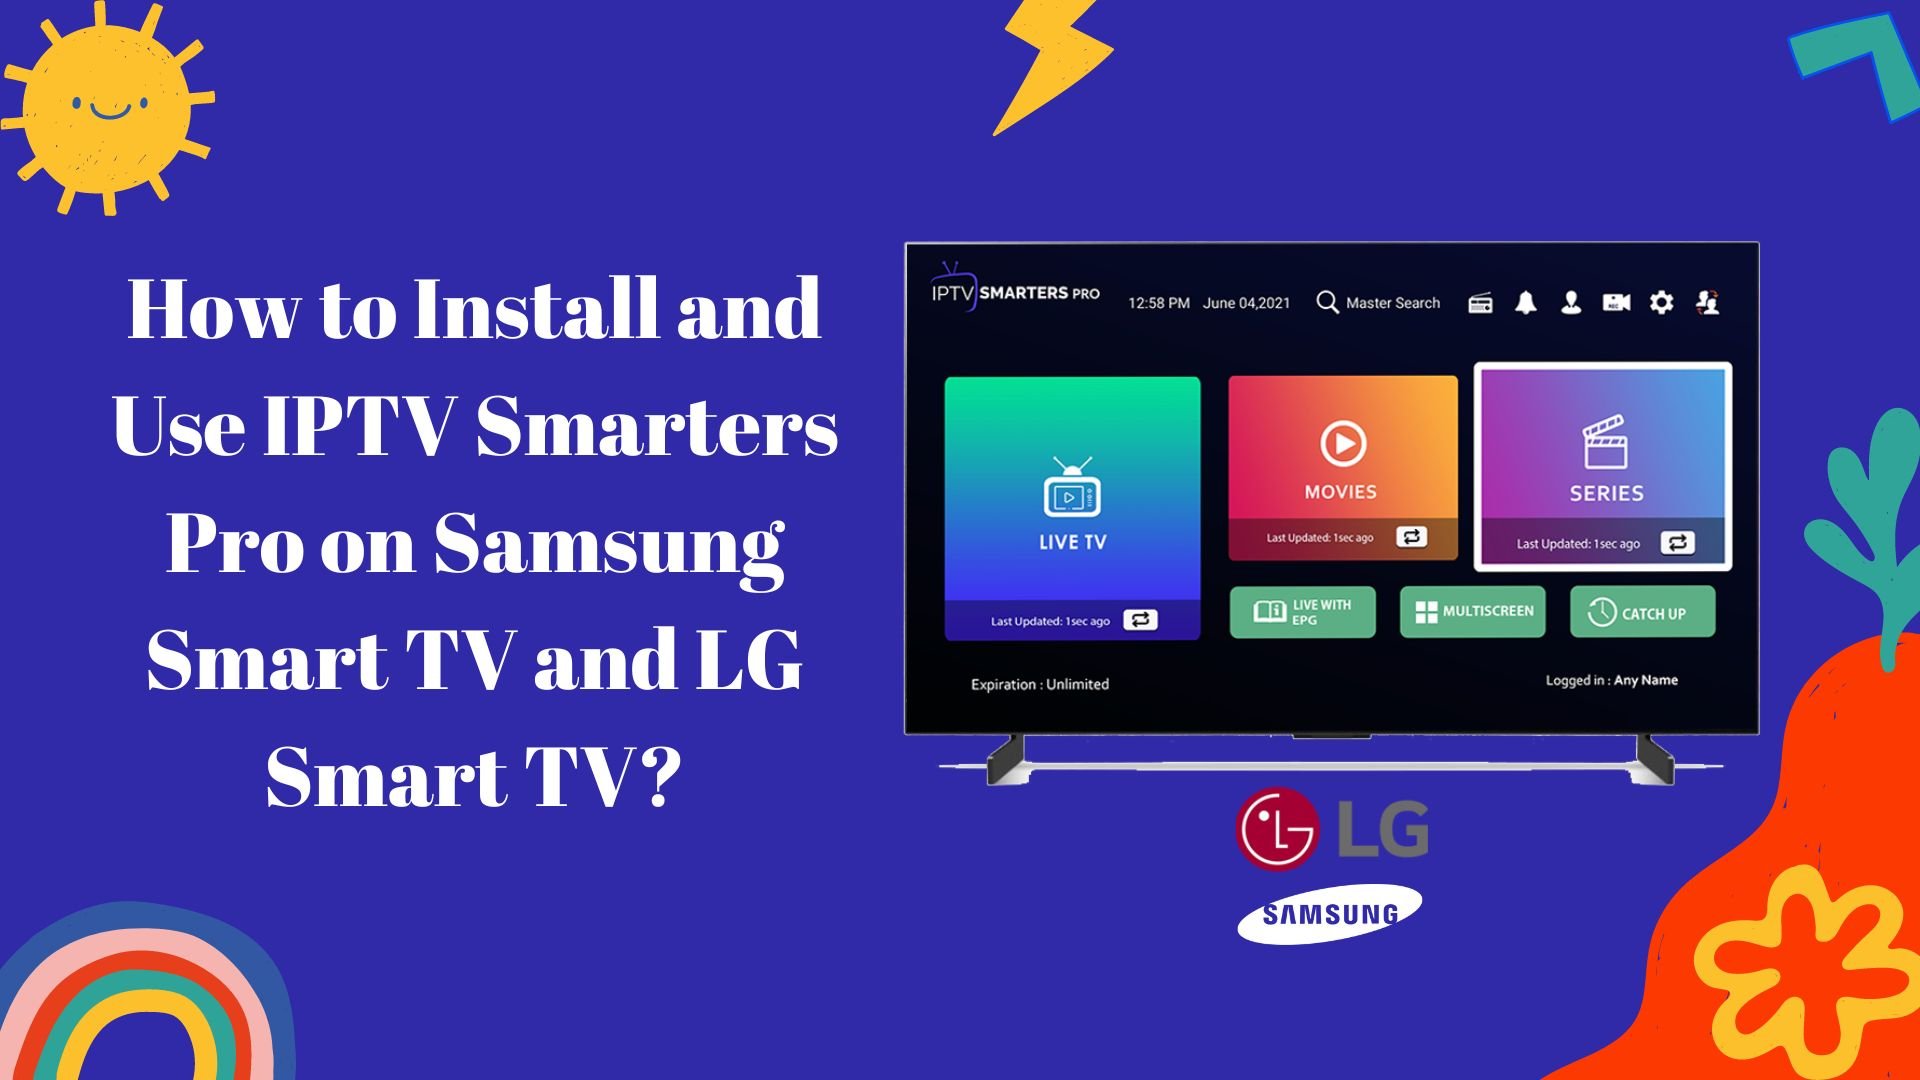 Best Iptv Player 2022 How to Install IPTV Smarters Pro on Samsung and LG Smart TV?